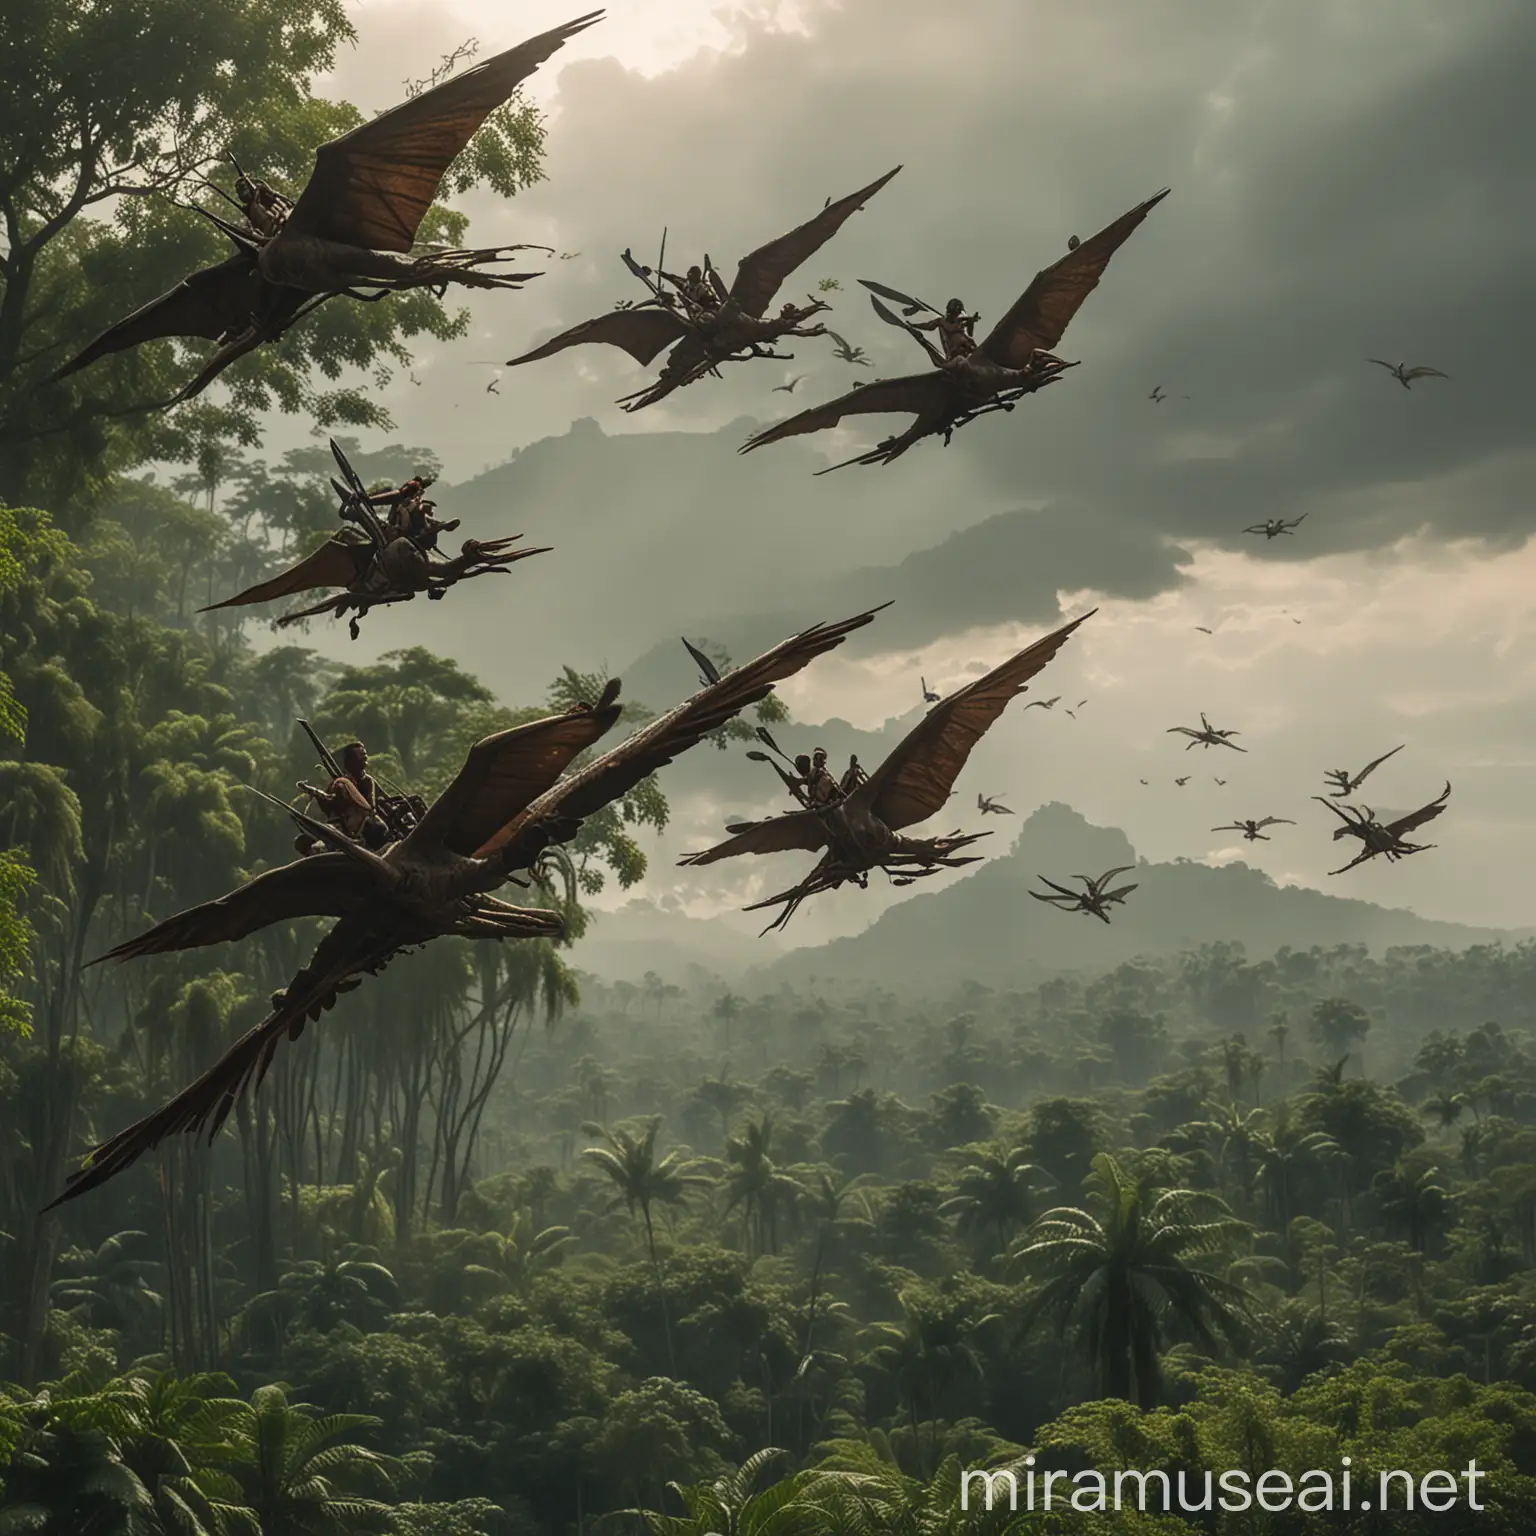 Ethiopian warriors, male and female, armed with rifles, flying on the backs of pterodactyls, soaring high over a lush, verdant jungle, under a clear sky with dynamic, cinematic lighting. The scene should be highly detailed, capturing the strength and determination of the warriors and the majestic flight of the pterodactyls.